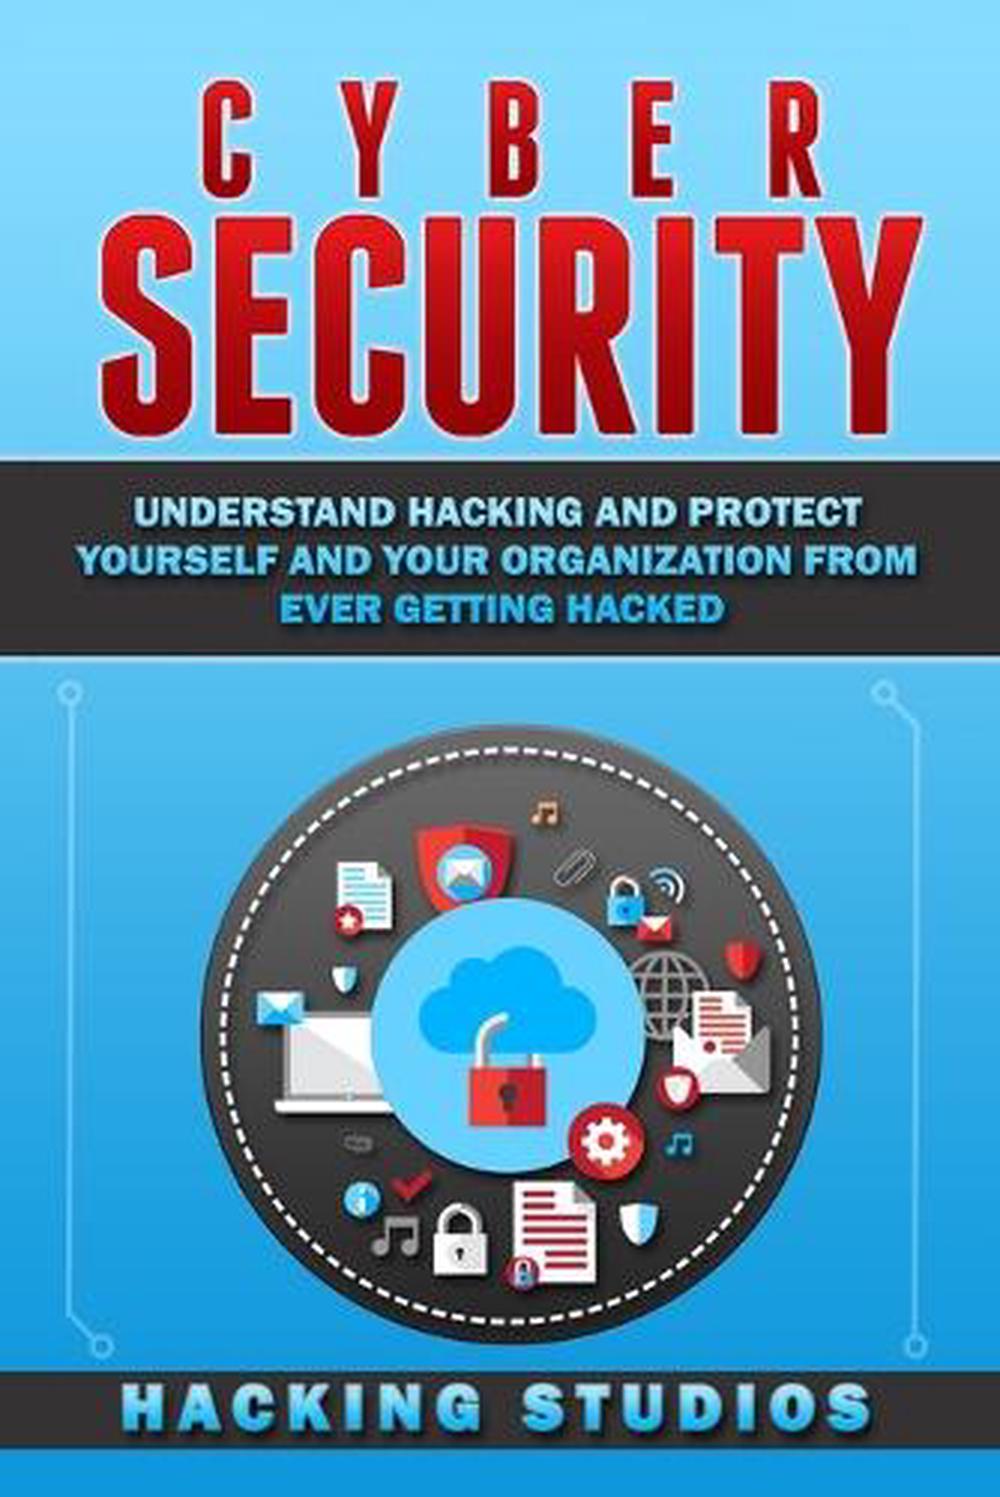 Cyber Security by Hacking Studios (English) Paperback Book Free